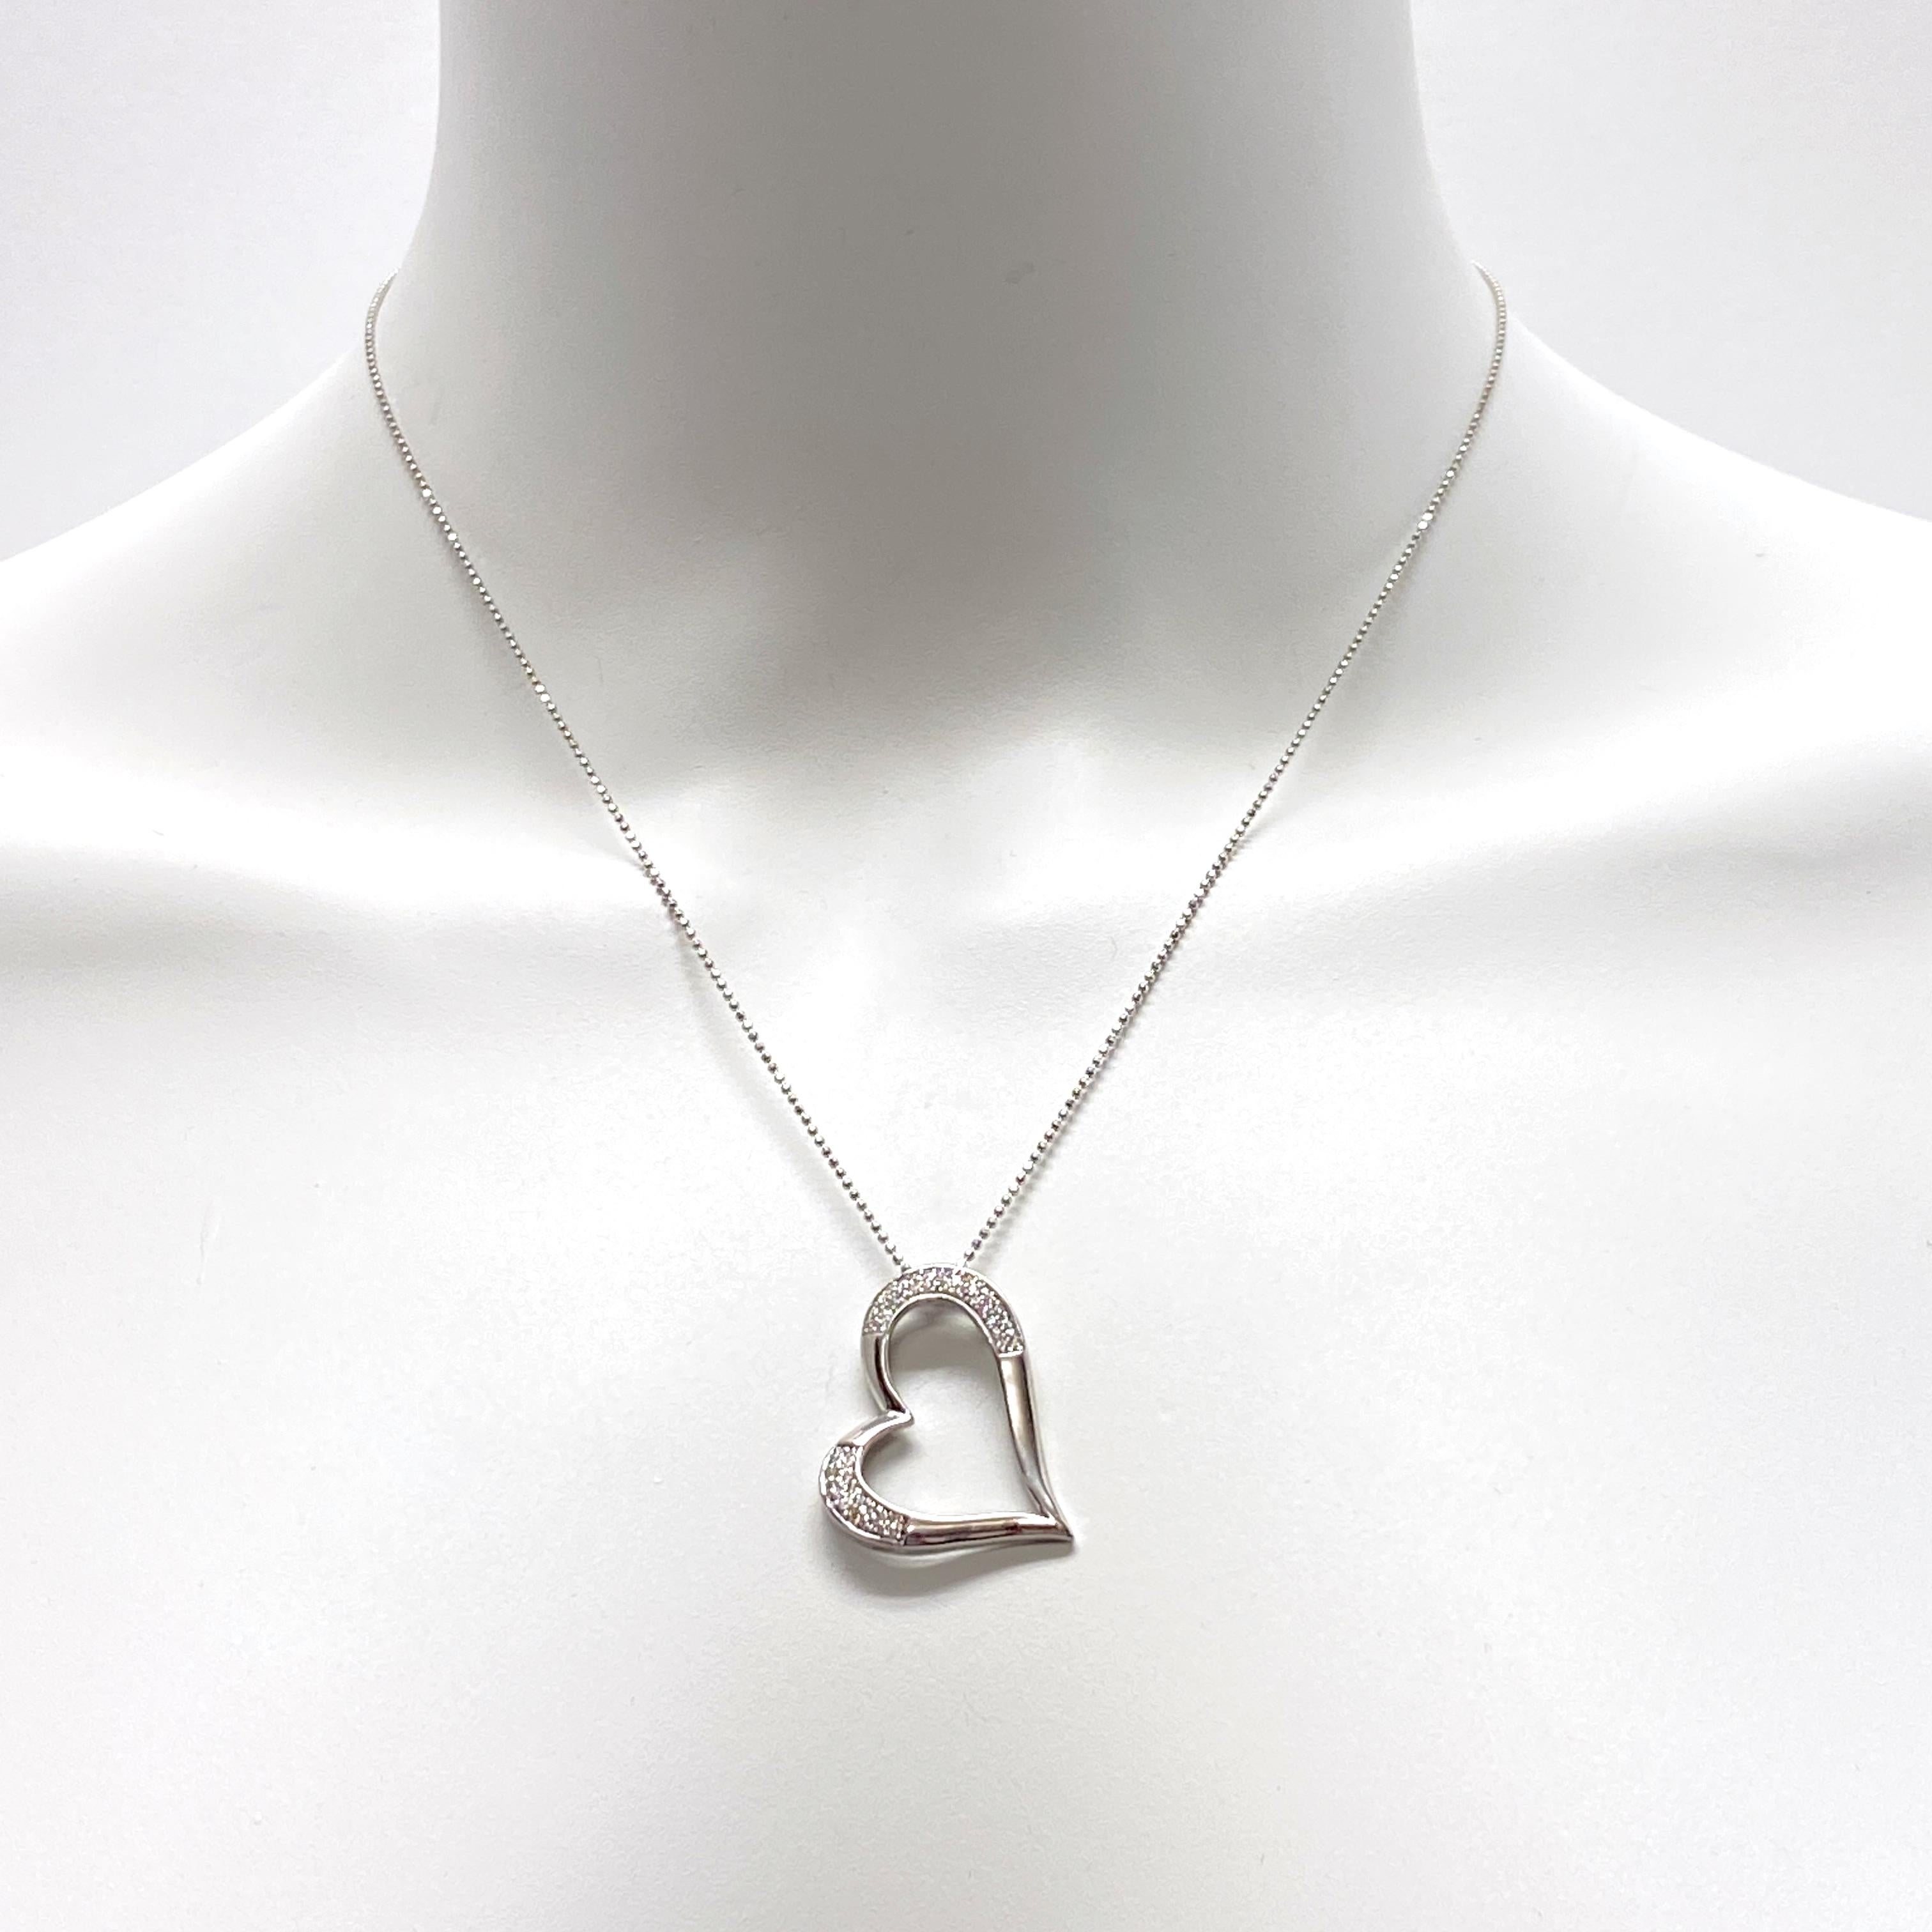 Eytan Brandes' sexy, sleek sideways heart pendant in high-polish 14 karat white gold features two panels of extremely small, neatly set natural white (untreated, earth-mined) diamonds -- a total of fifty stones for a total diamond weight of a